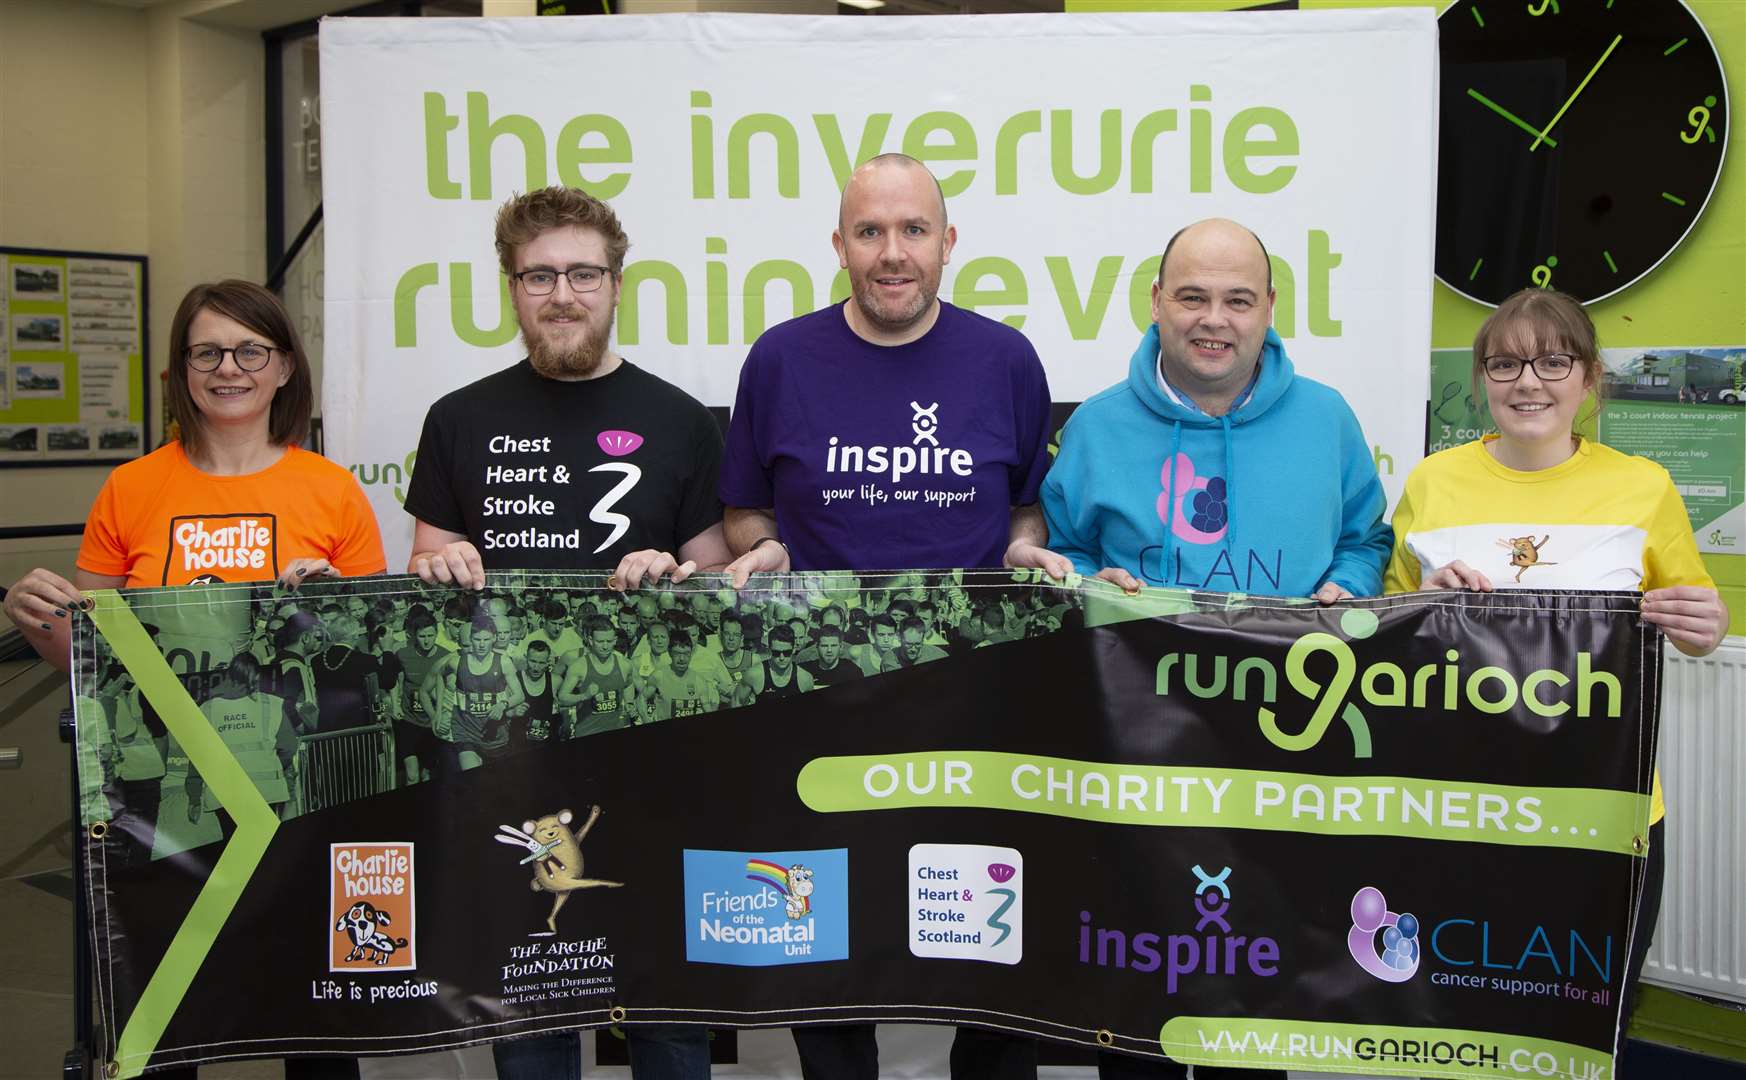 Run Garioch’s charity partners Donna Deans (Charlie House), Oliver Middleton (Chest Heart & Stroke Scotland), Andrew Reid (Inspire PTL), Neil Martin (CLAN) and Chloe Jackson (The Archie Foundation). Picture: Paul Douglas